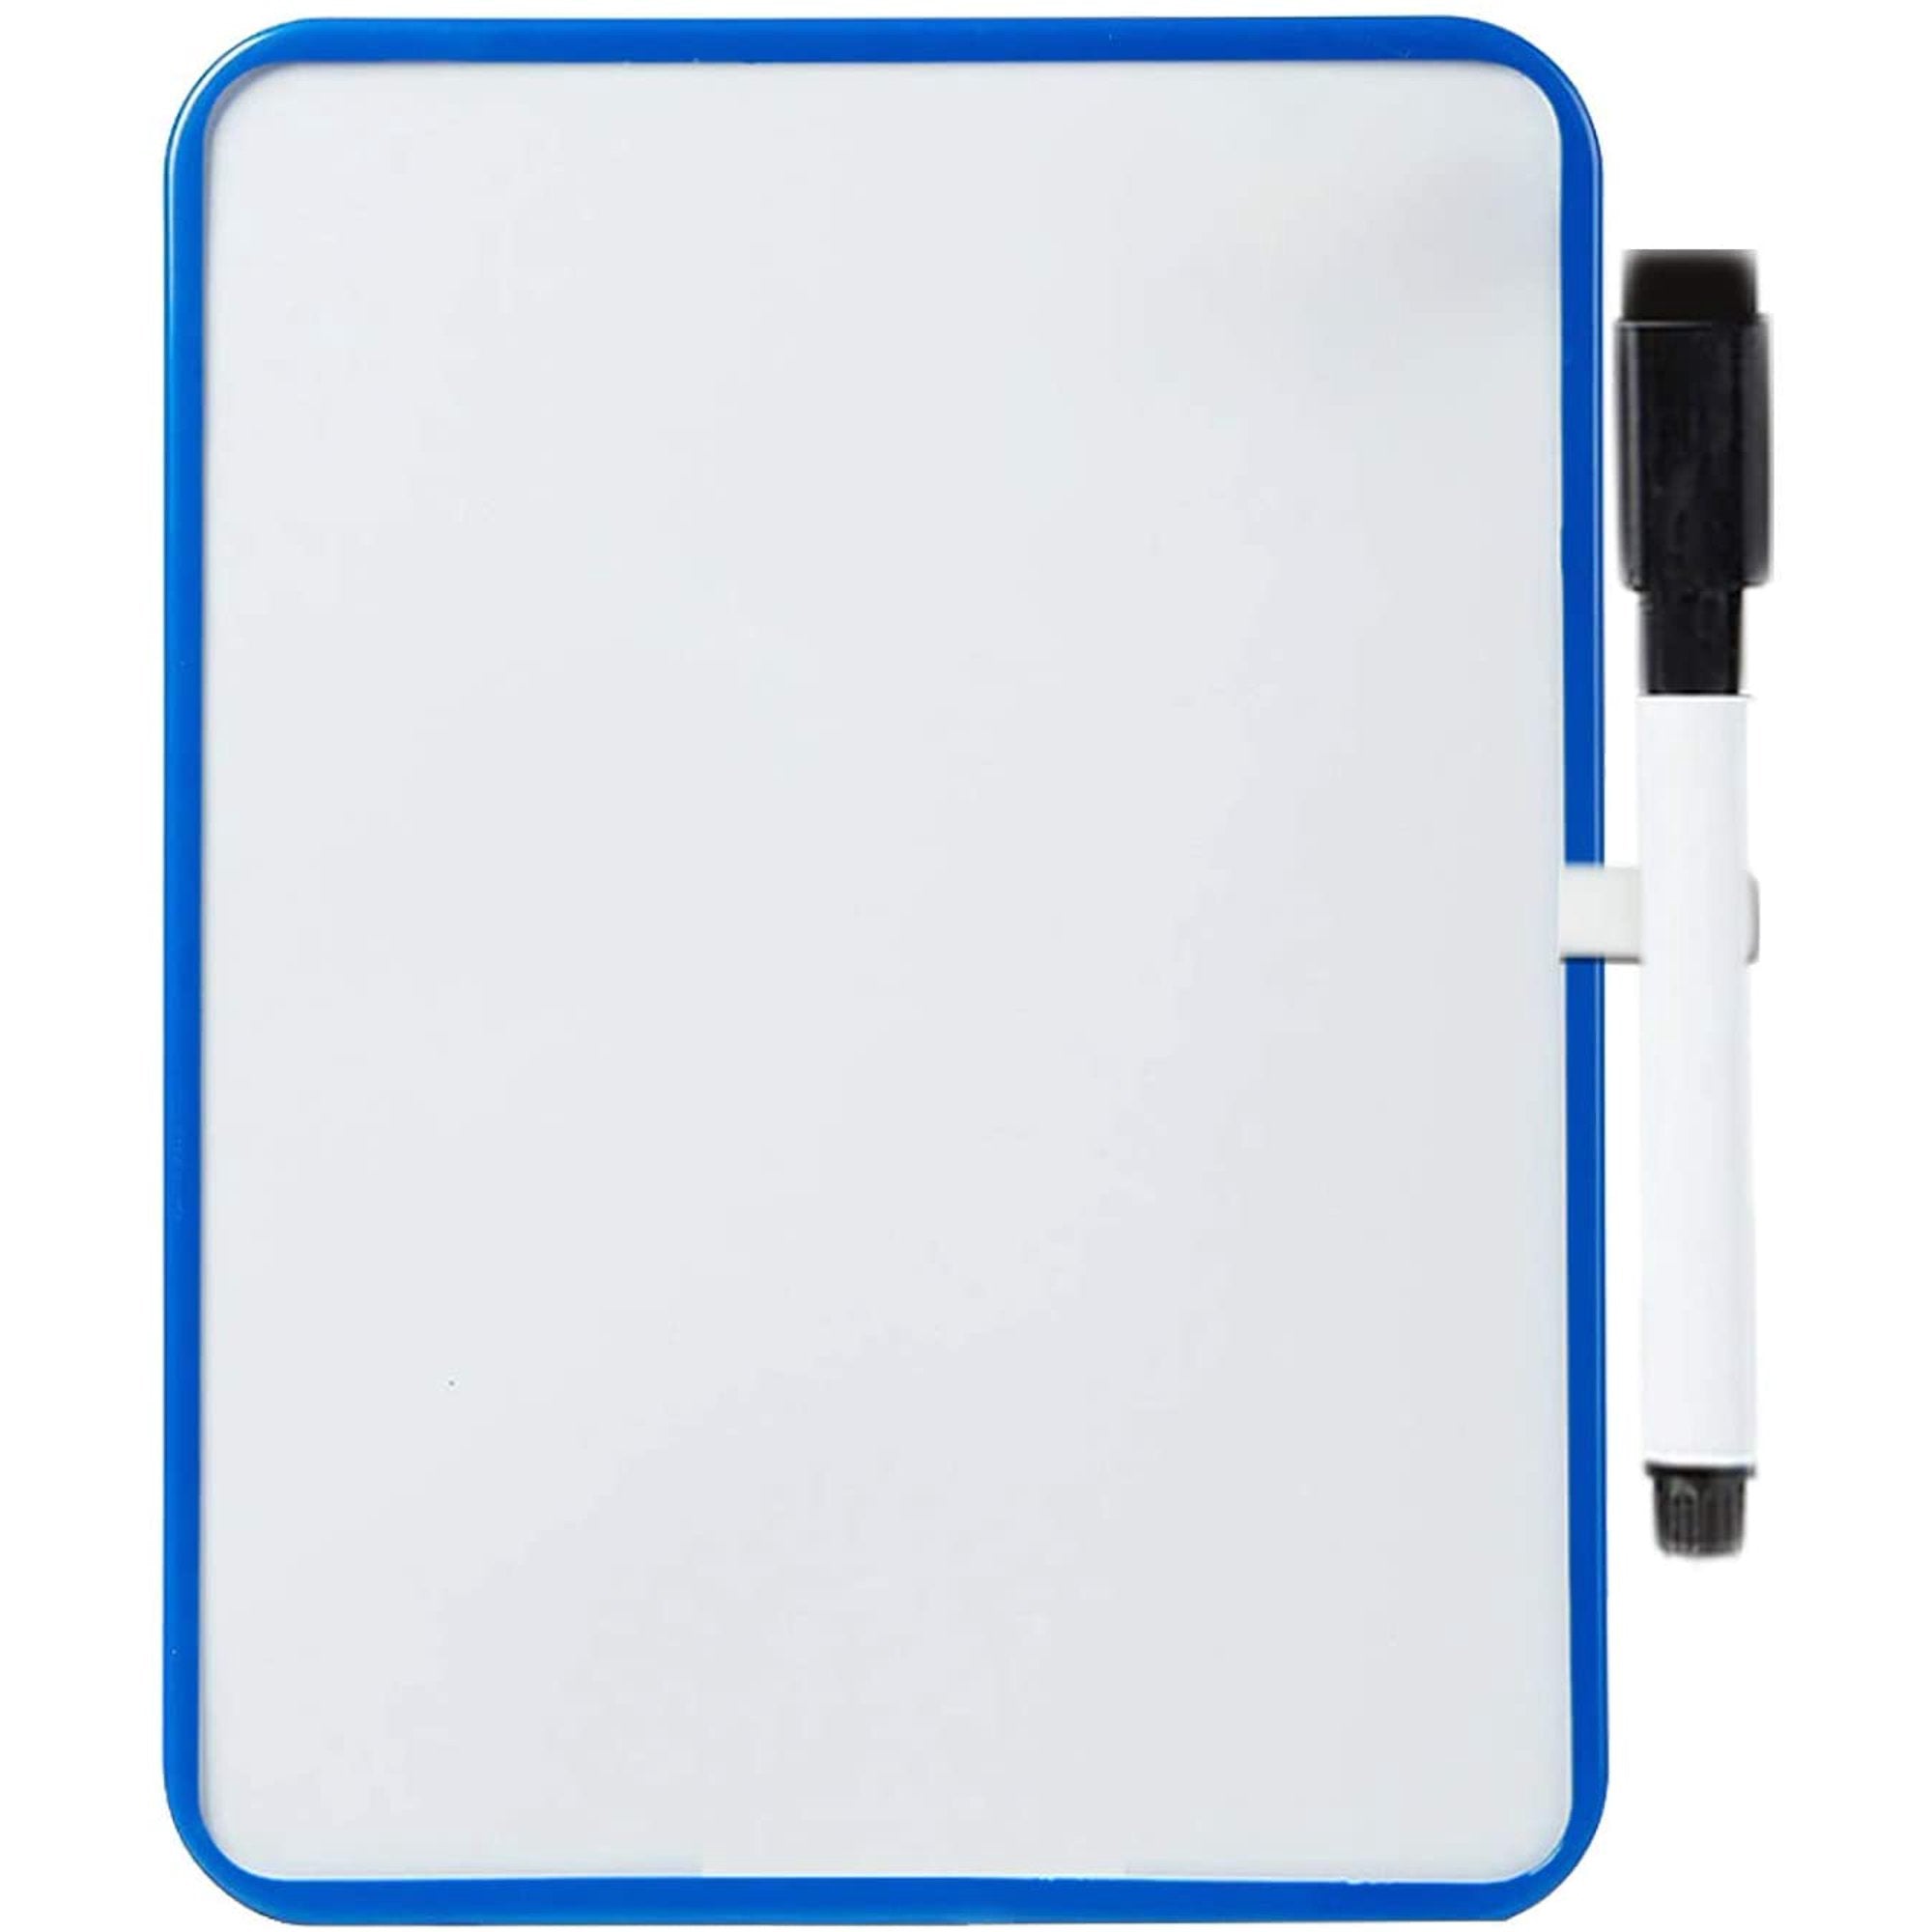 Ixir Small Dry Erase White Board, Ixir 6.5 x 8.25-inch Magnetic Hanging Whiteboard Portable Mini Easel Board for Kids Drawing, Kitchen Grocery List -Blue